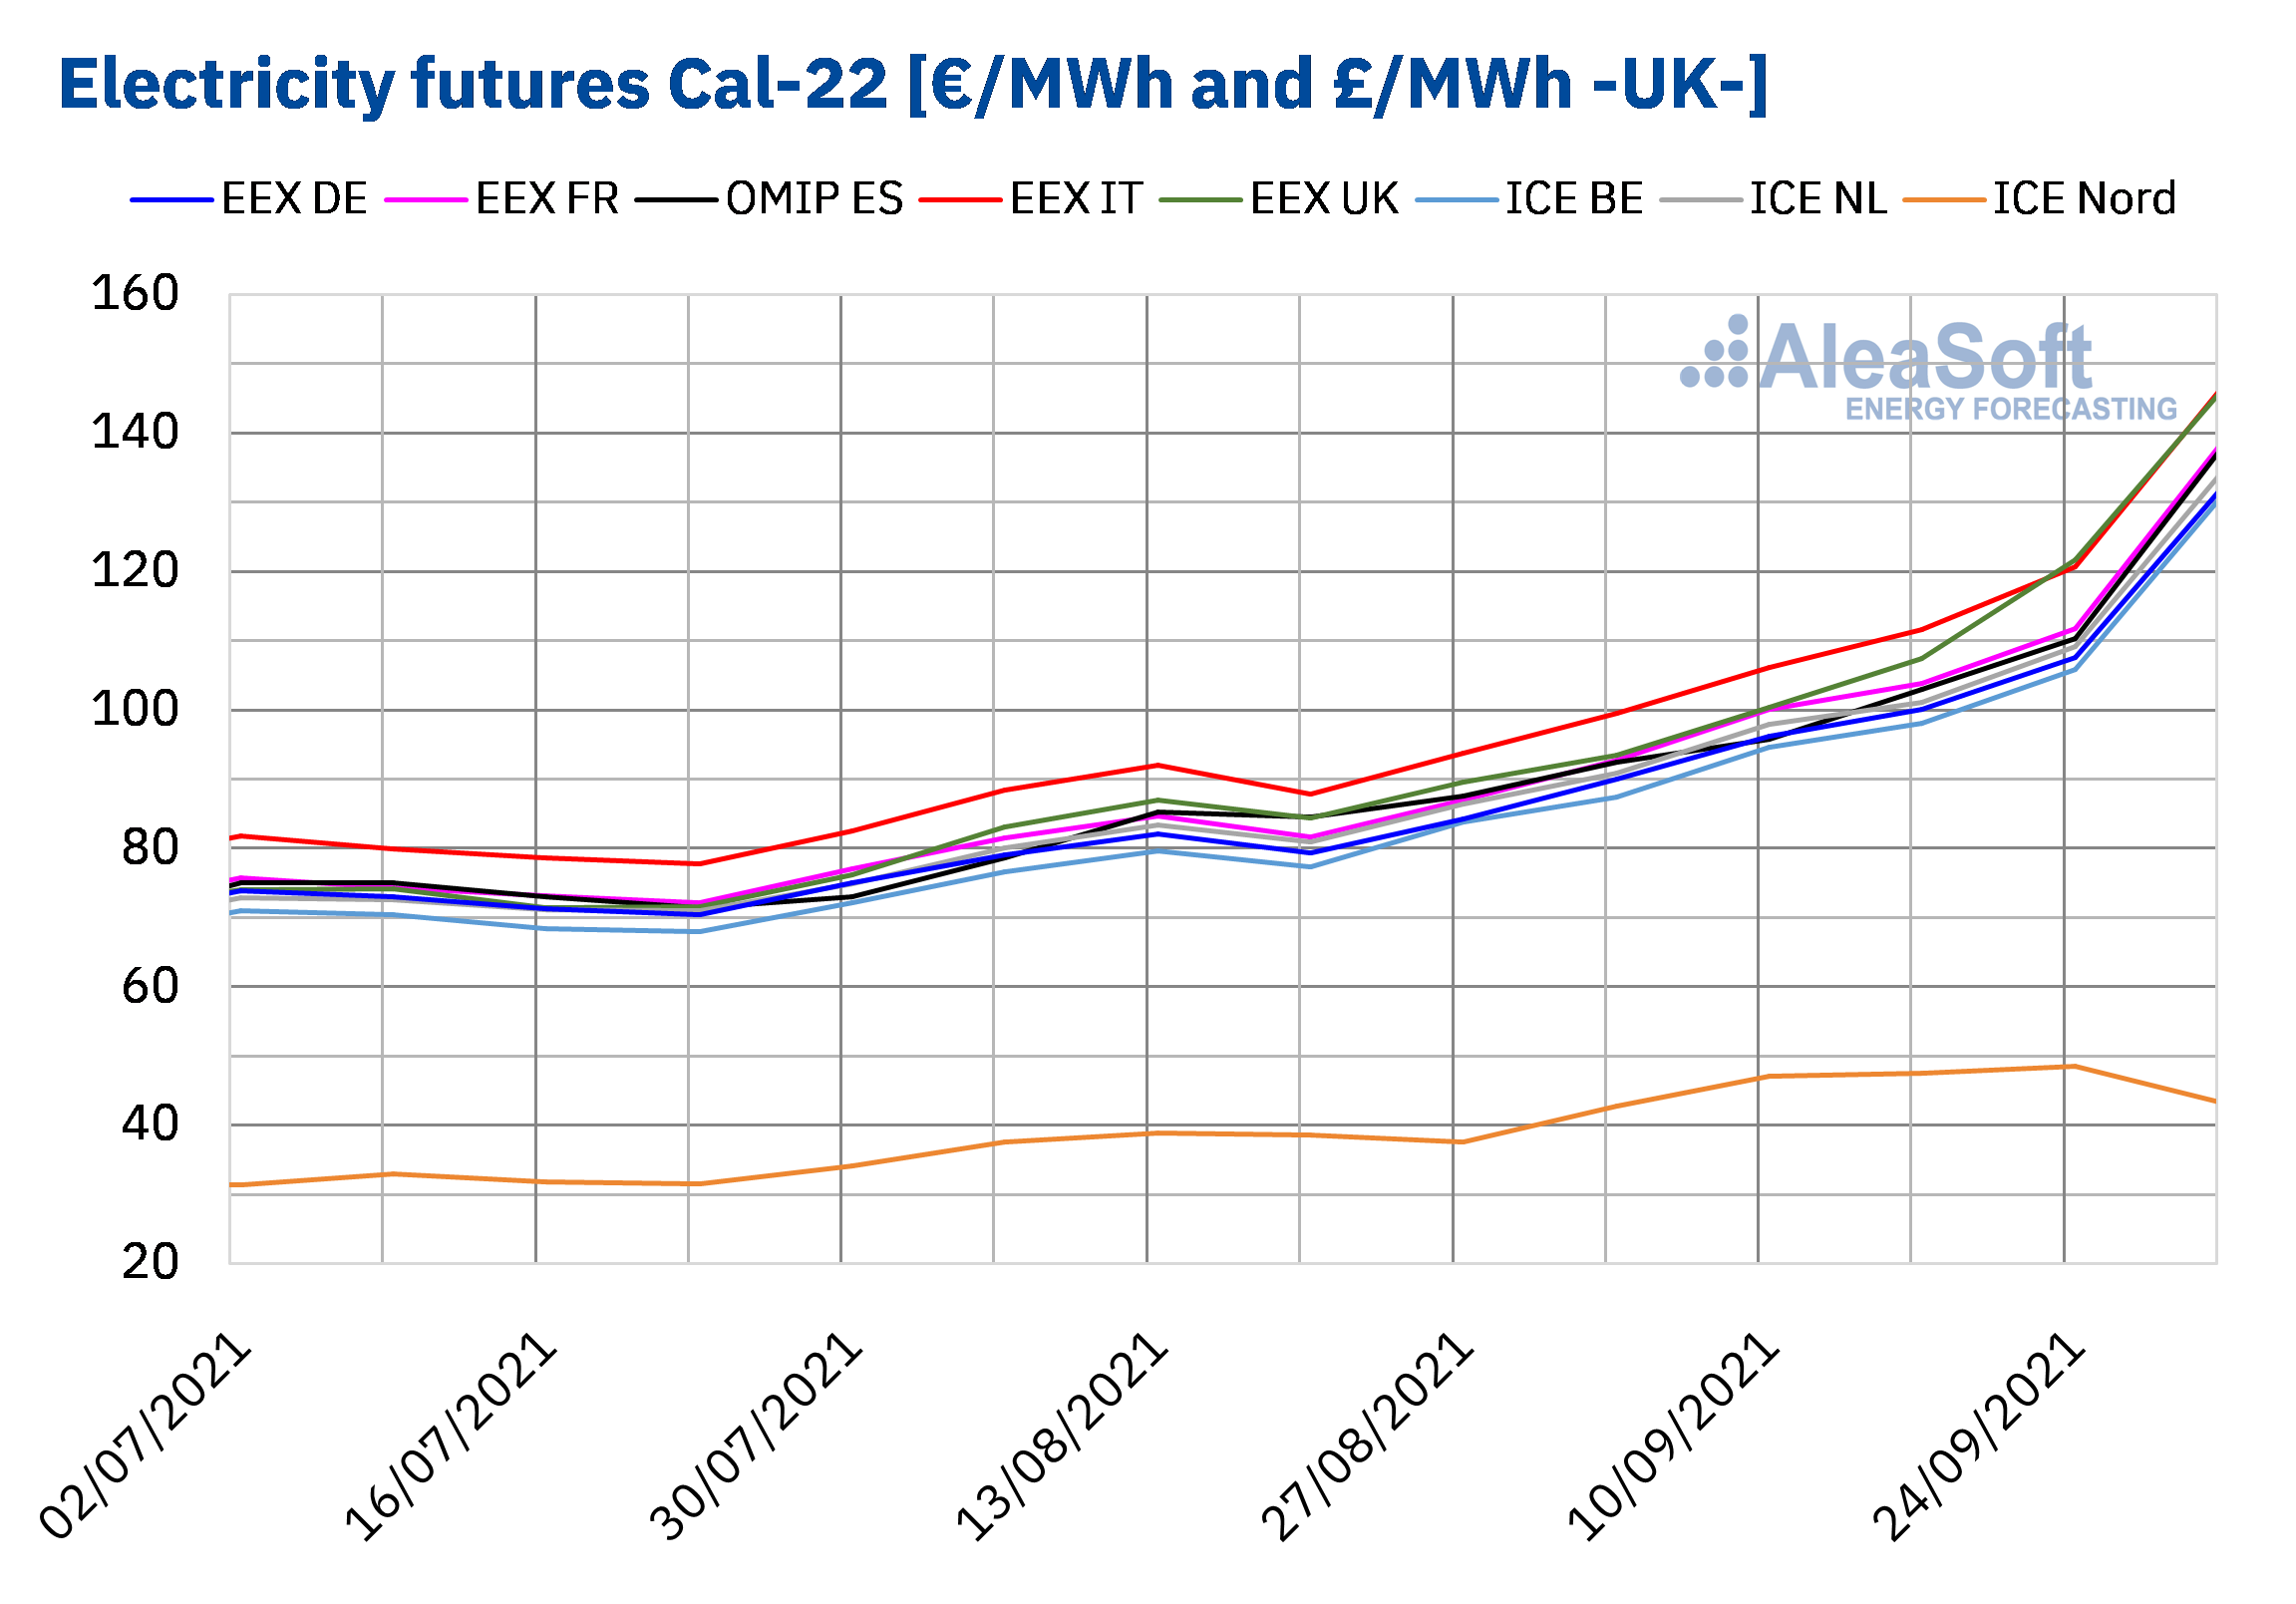 AleaSoft - electricity futures prices cal 22